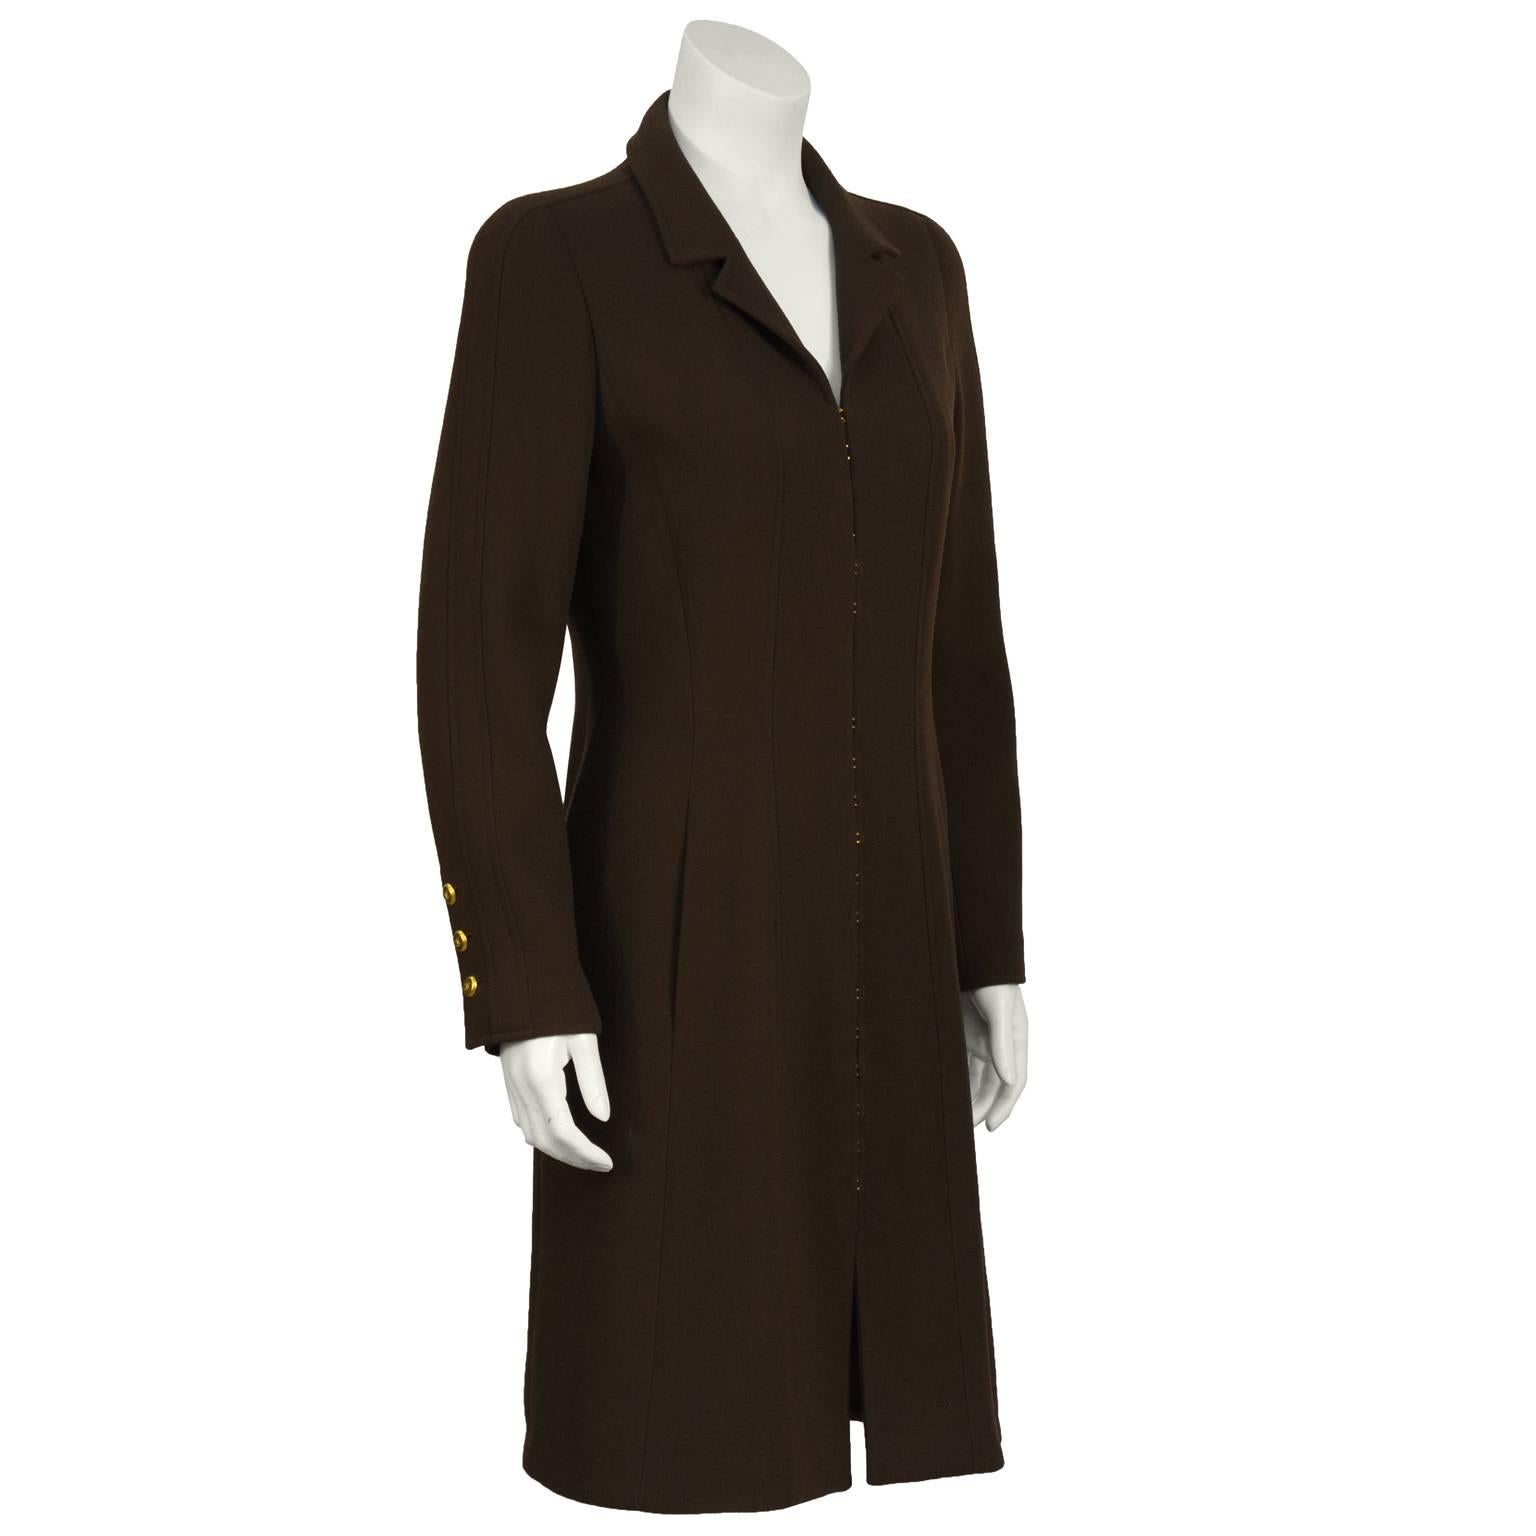 Chanel Fall 1996 brown wool crepe coat dress featuring a multiple gold hook  detail at the front. The coat features a petite notched collar and seams down the front with inseam pockets. The cuffs have gold cc buttons. In excellent condition. Fits